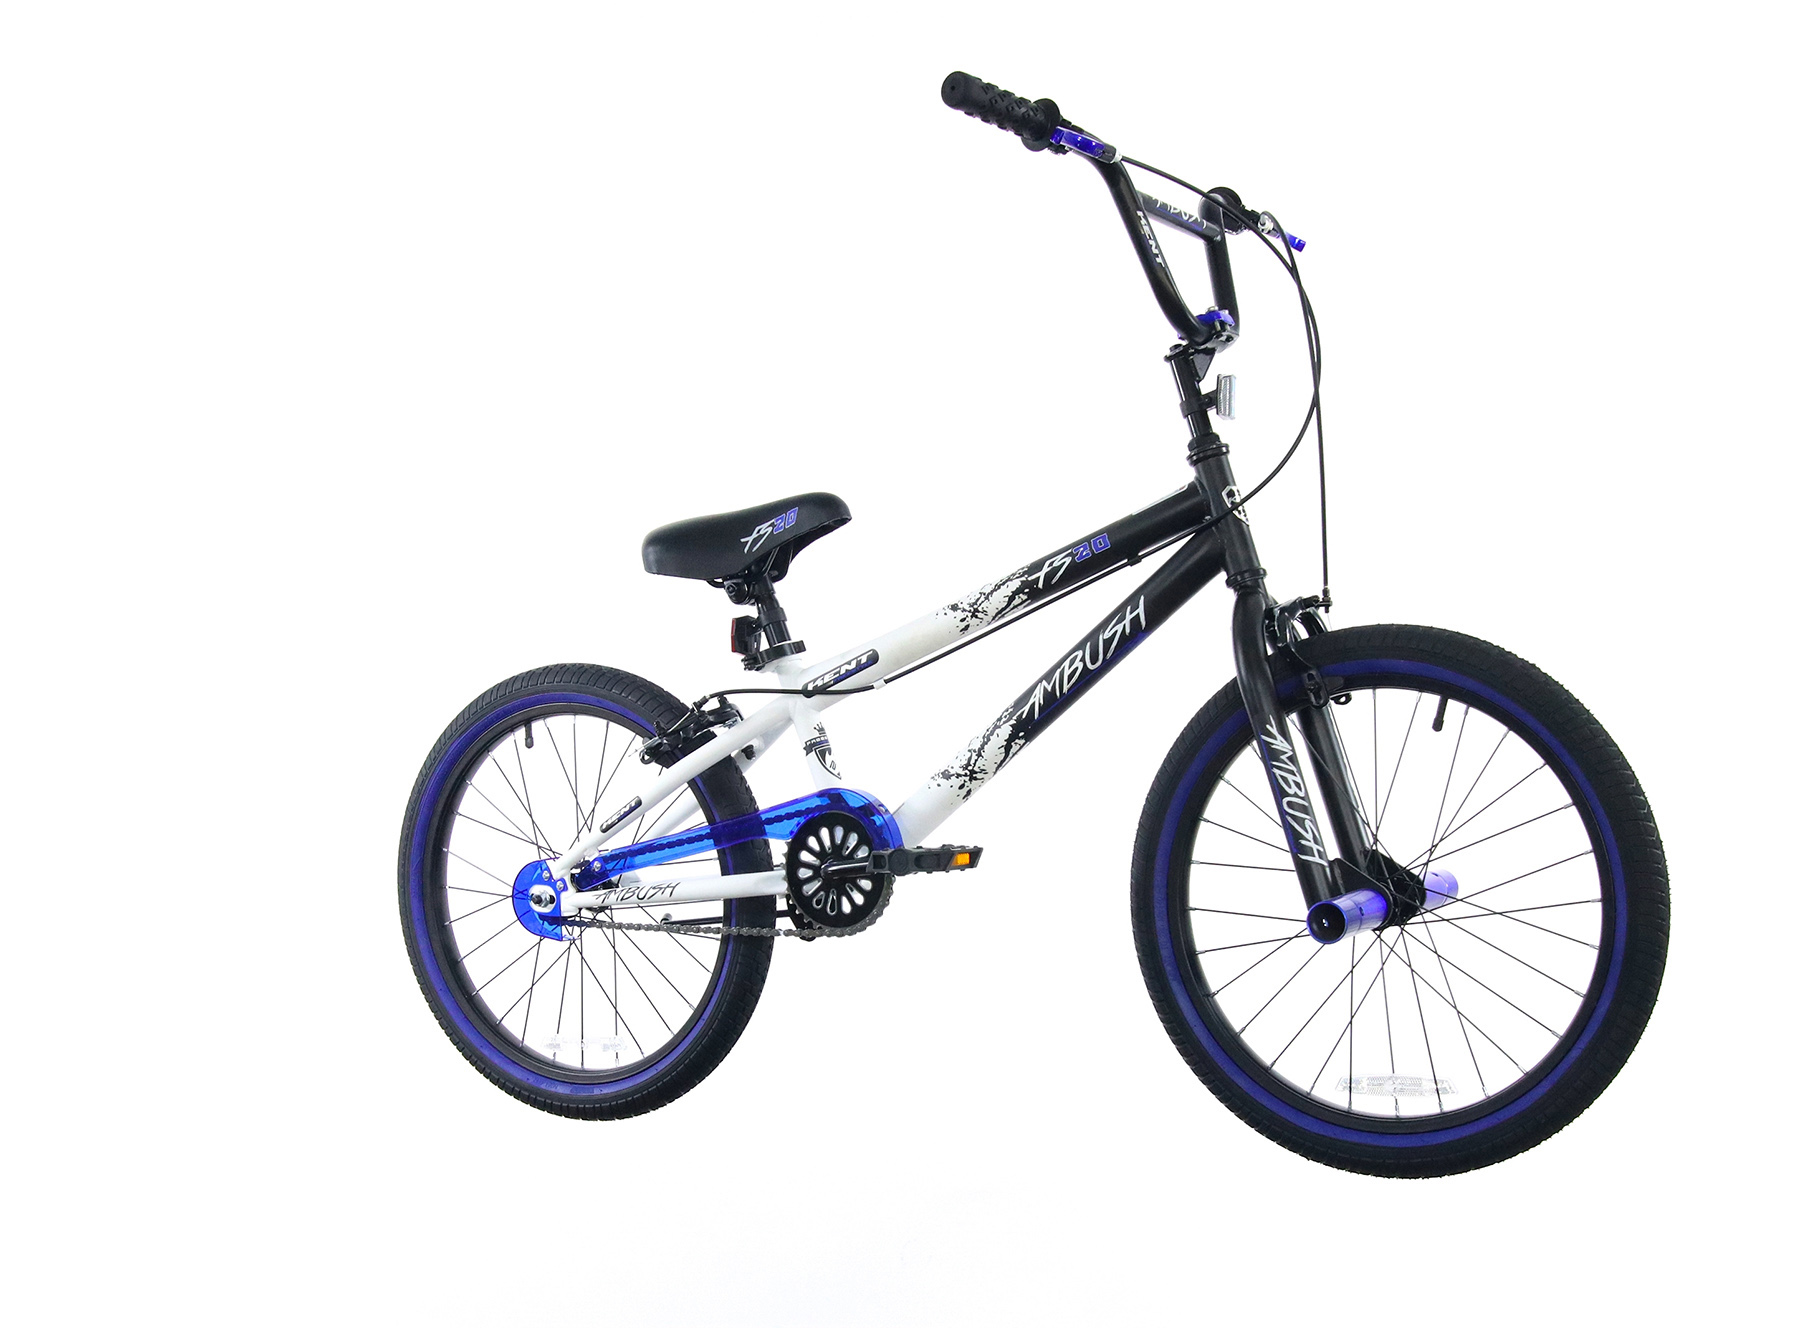 Impulsively bought a BMX bike, didnt film any content, bmx